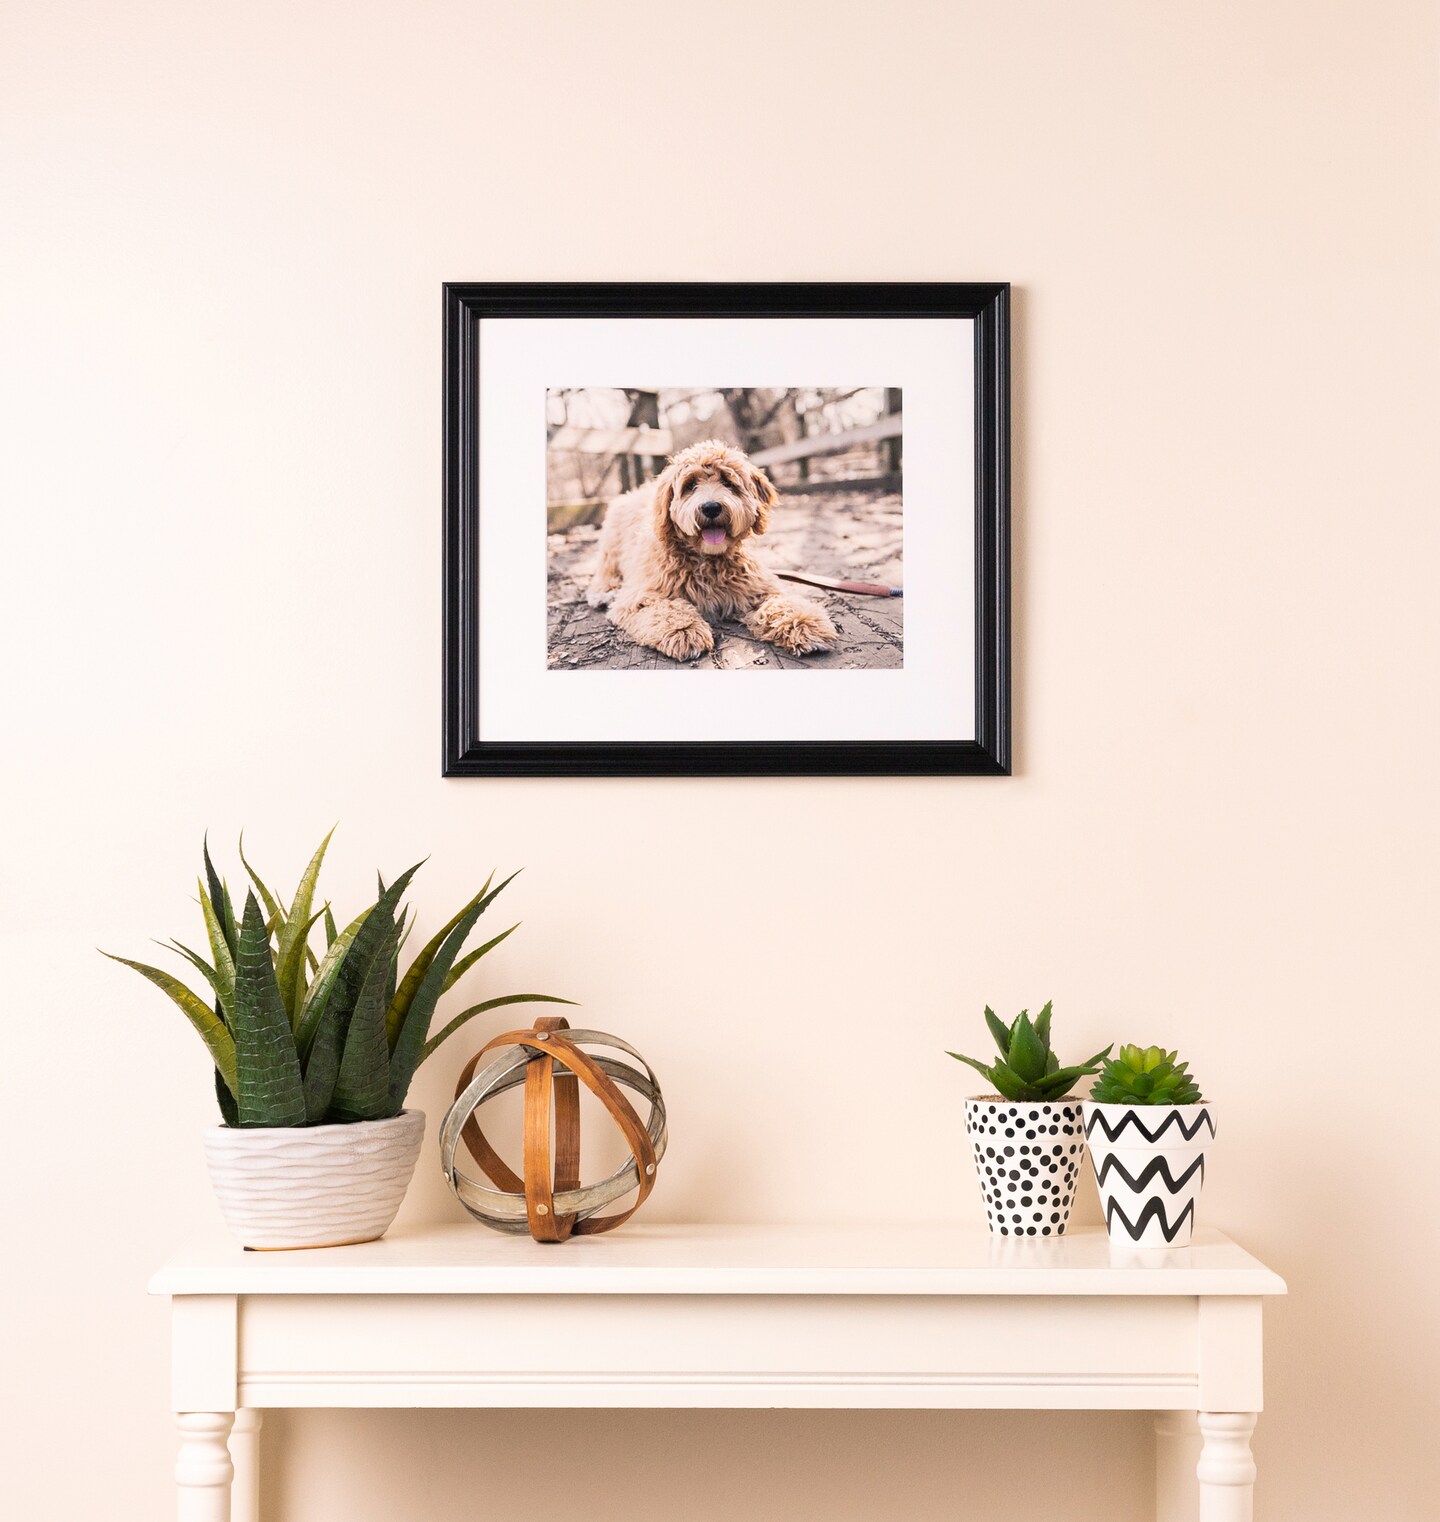 ArtToFrames 12x24 Inch  Picture Frame, This 1 Inch Custom Wood Poster Frame is Available in Multiple Colors, Great for Your Art or Photos - Comes with 060 Plexi Glass and  Corrugated Backing (A9IO)